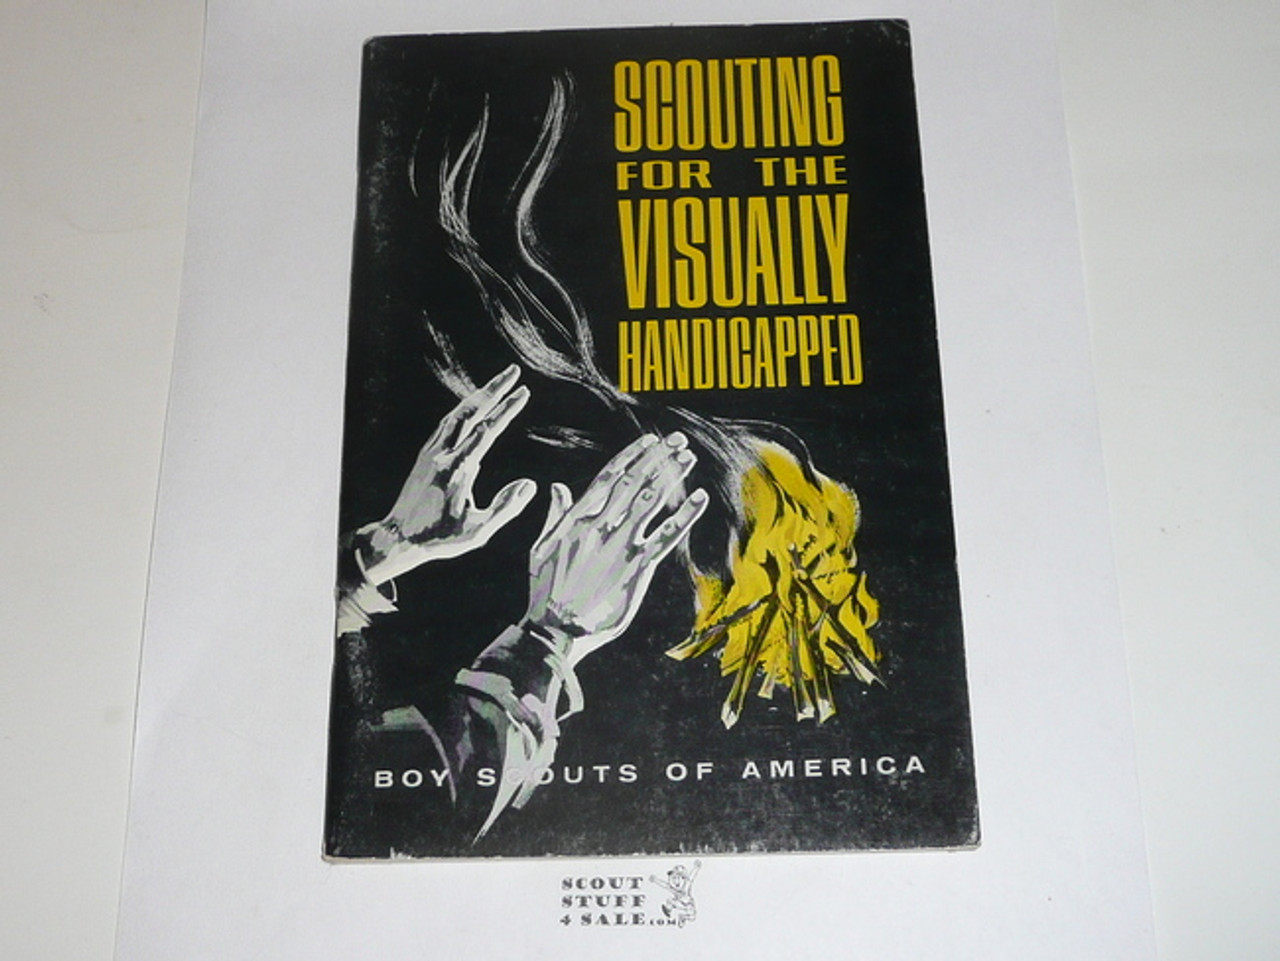 1968 Scouting for the Visually Handicapped, 8-68 printing